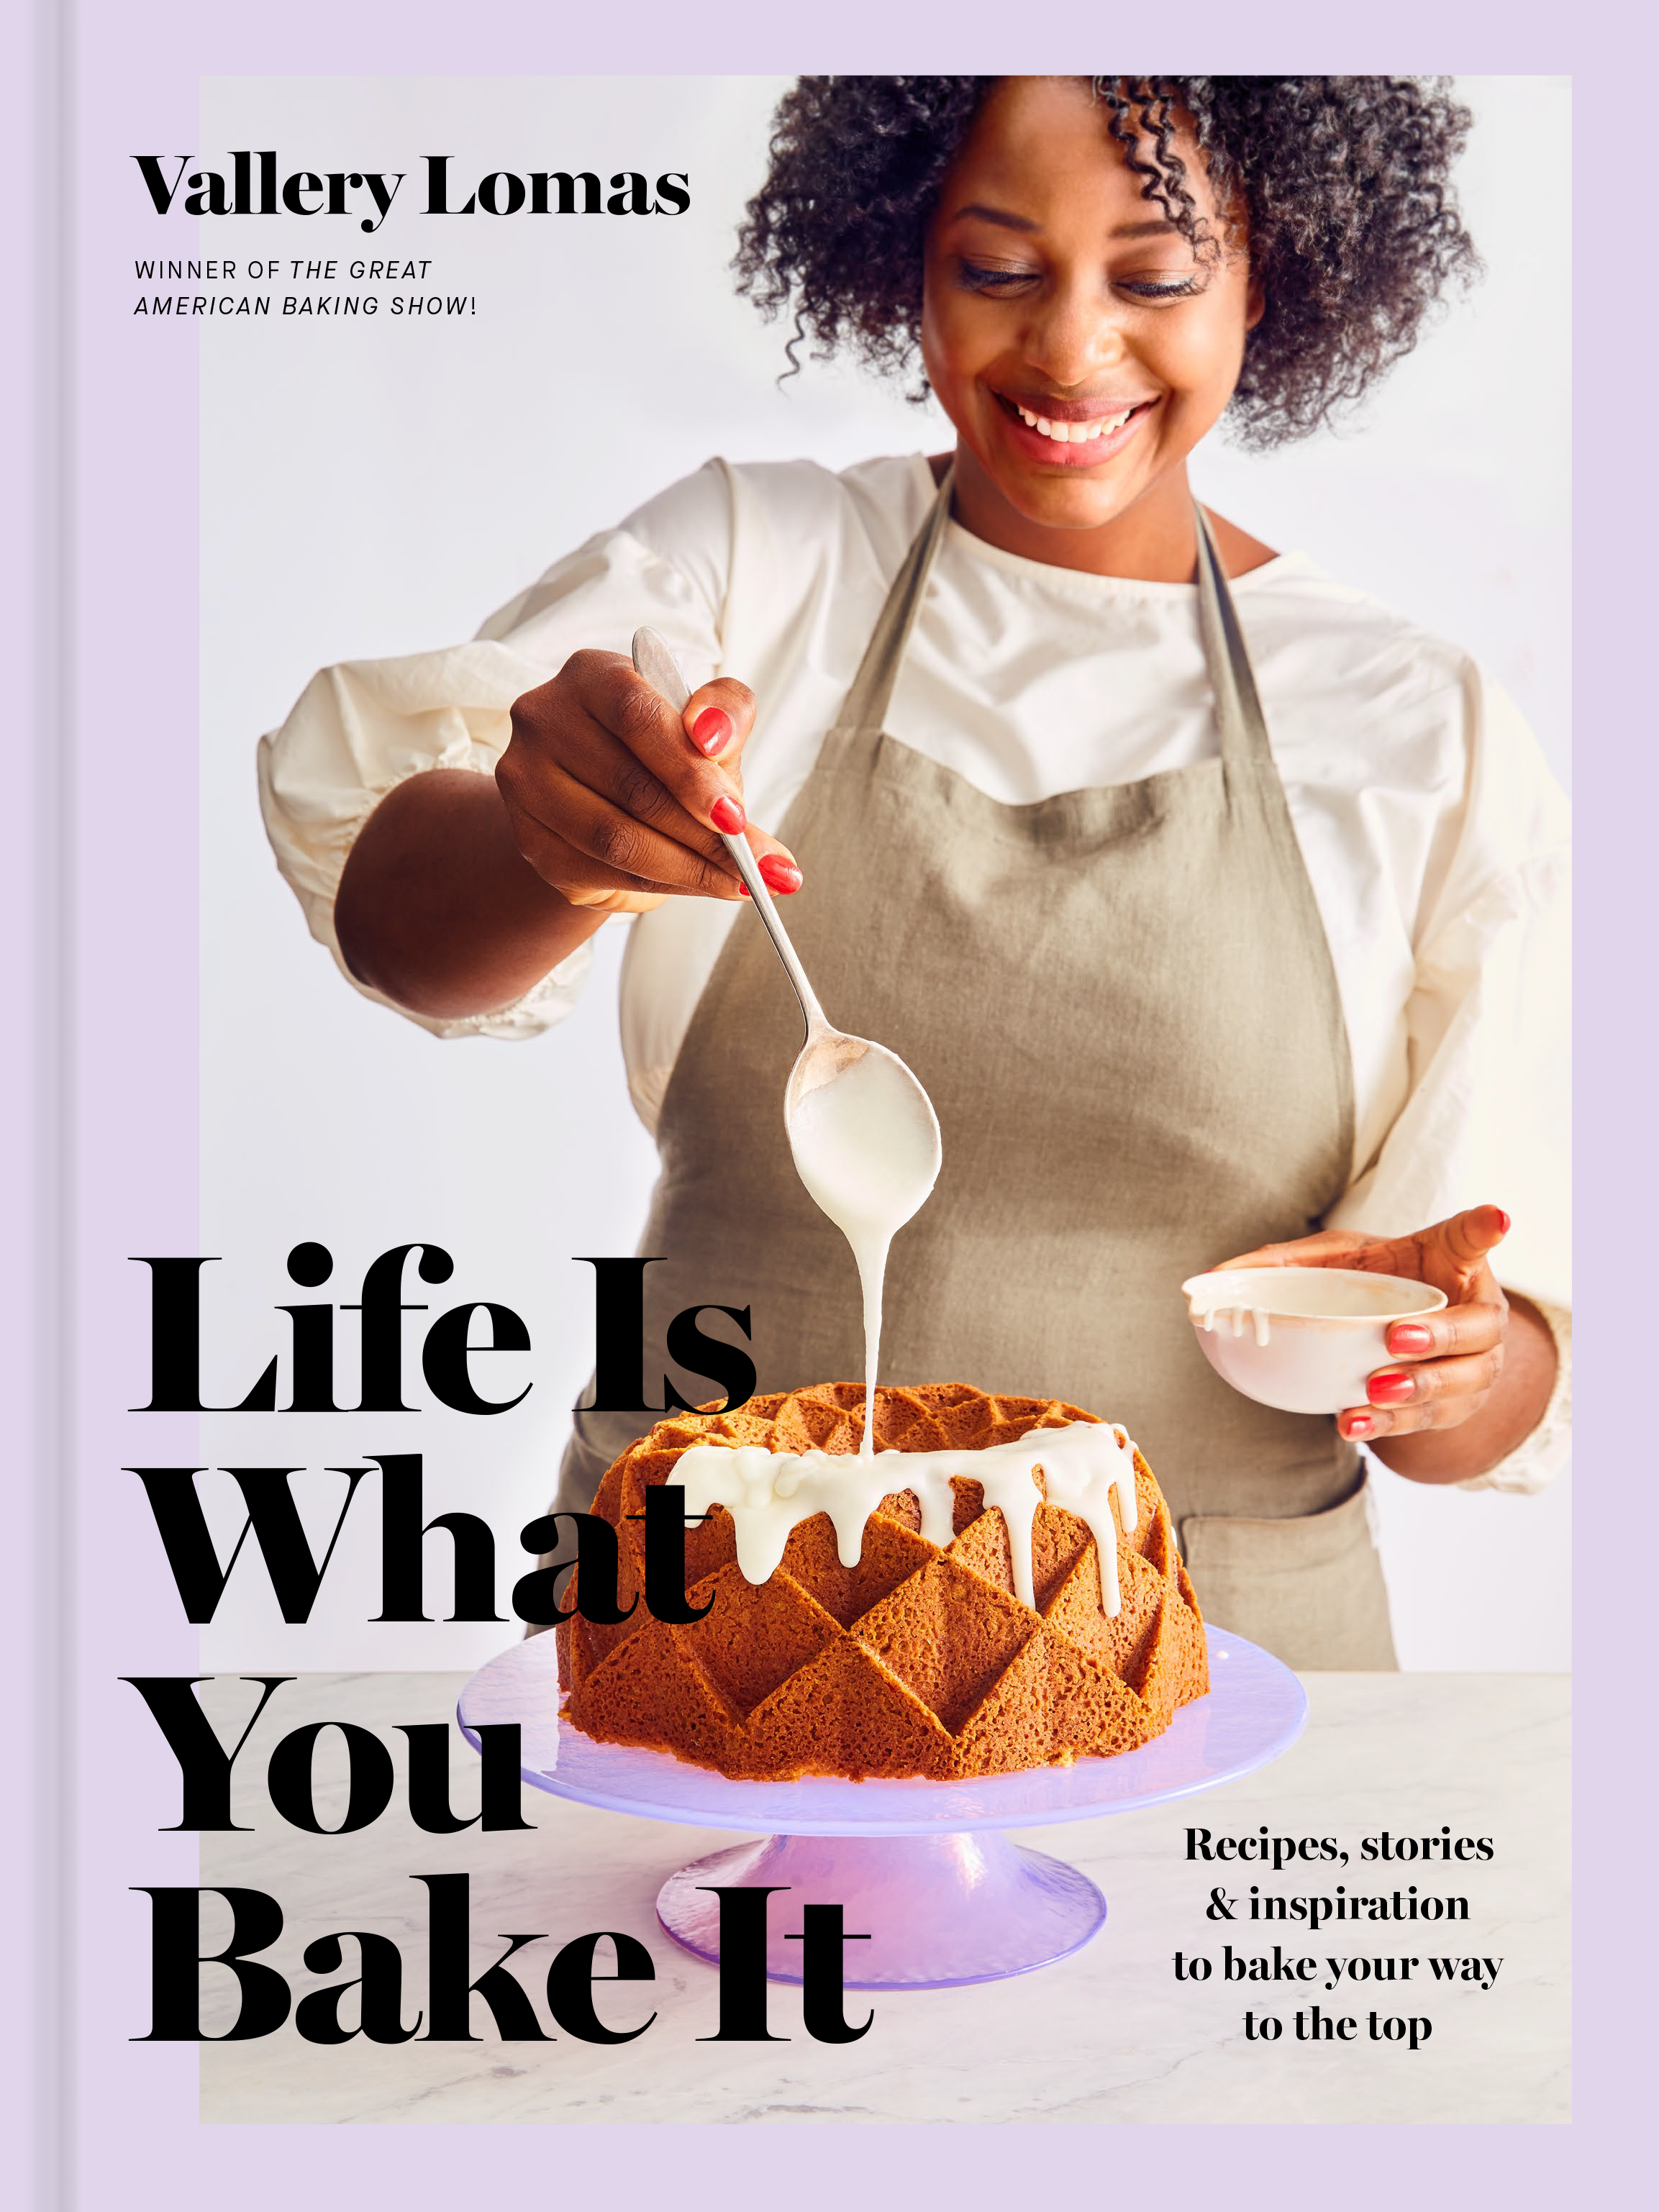 “Life Is What You Bake It: Recipes, Stories & Inspiration to Bake Your Way to the Top,” by Vallery Lomas.